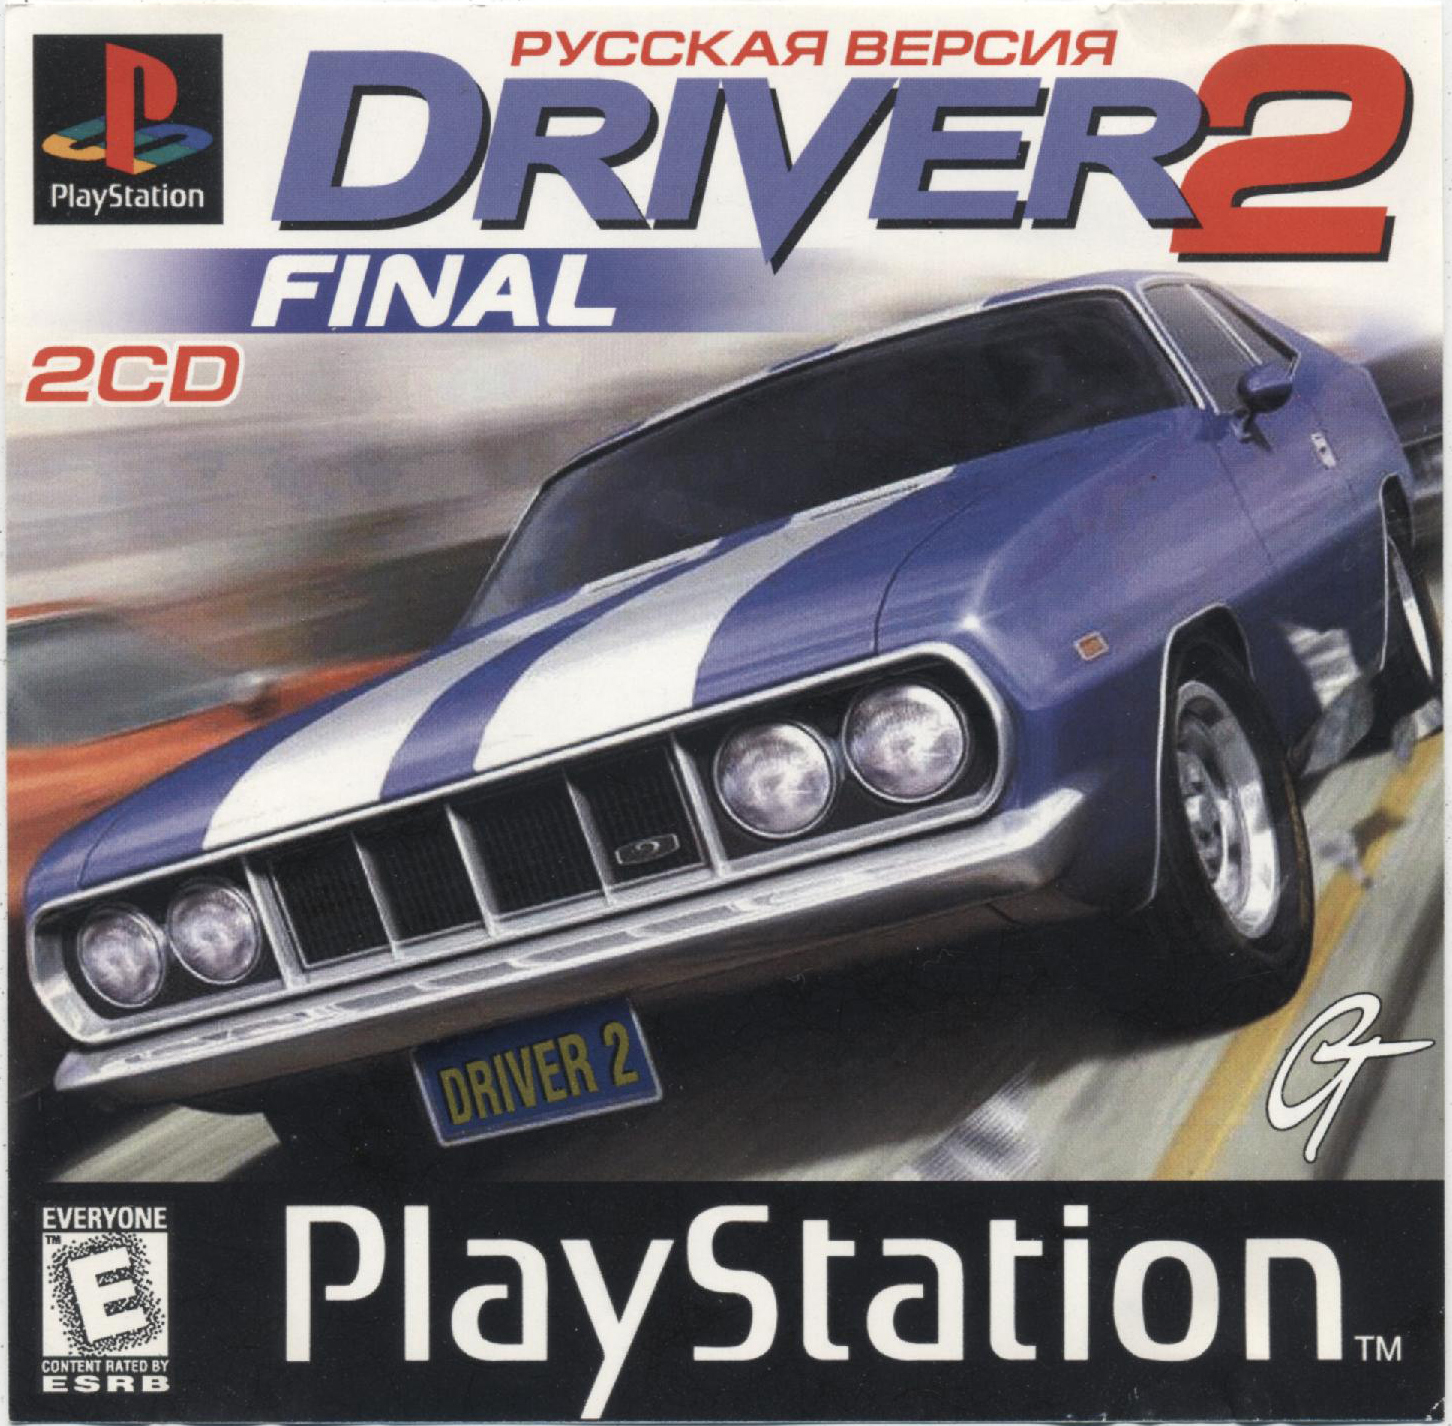 Playstation rus. Driver 2 Sony PLAYSTATION 1. Driver Sony PLAYSTATION 1. Driver 2 обложка. Driver ps2 диск.